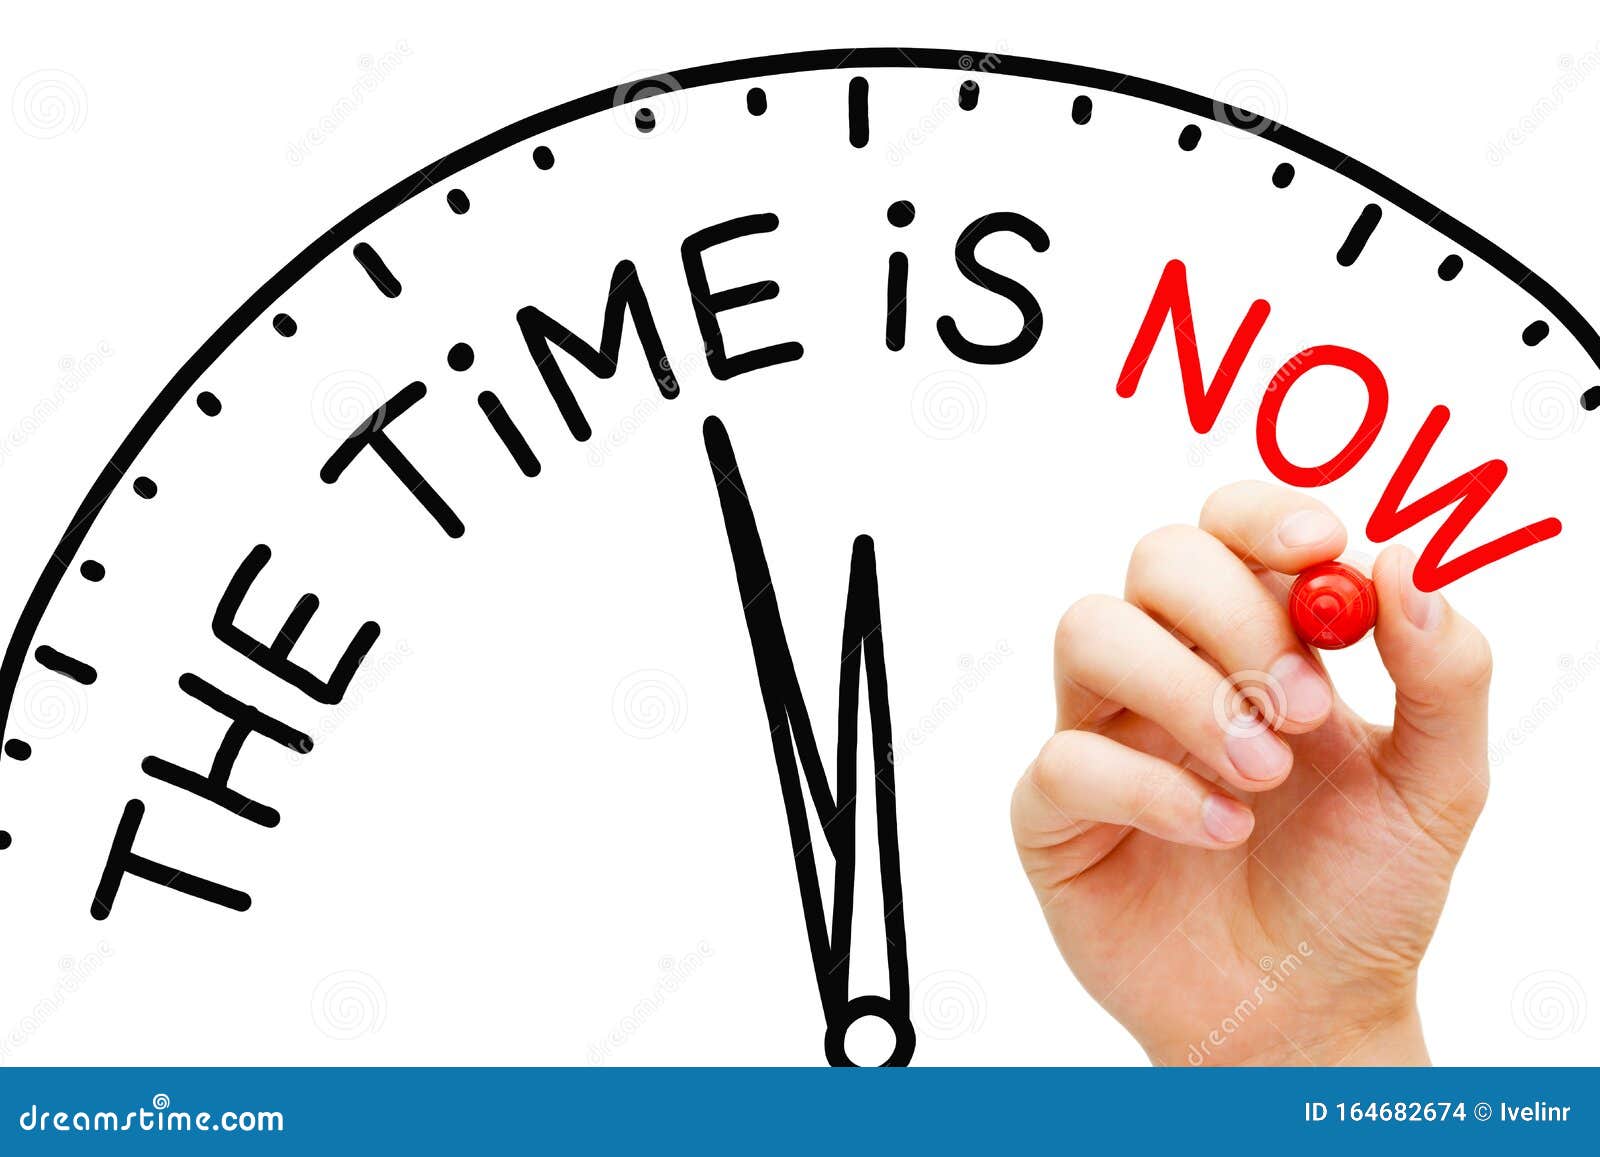 The Time is Now Clock Concept Stock Photo - Image of improve, asap michigan time now am